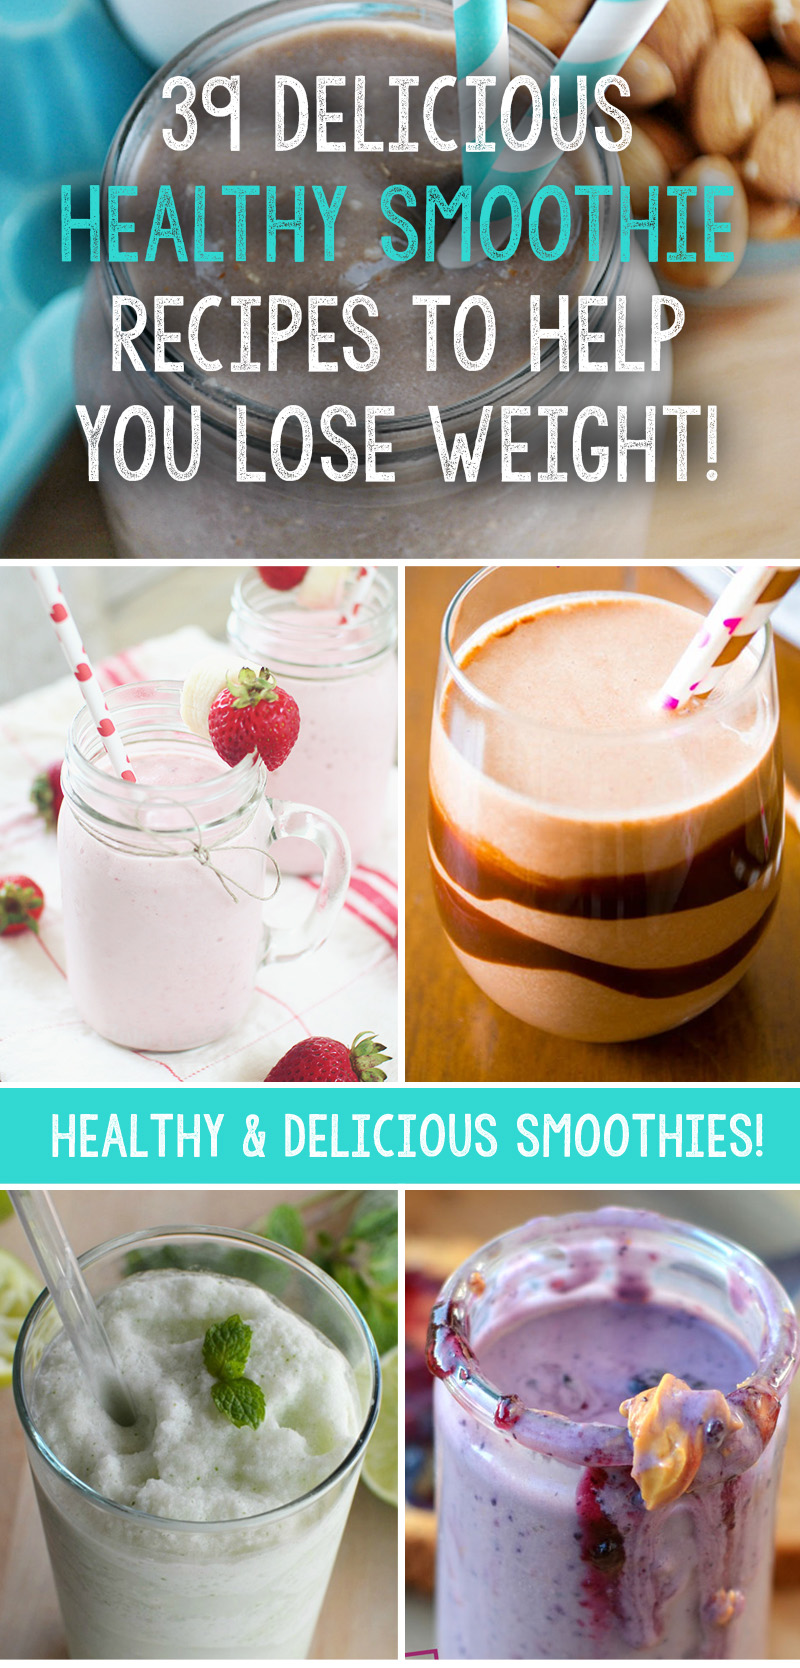 39 Delicious Healthy Smoothie Recipes To Help You Lose Weight!